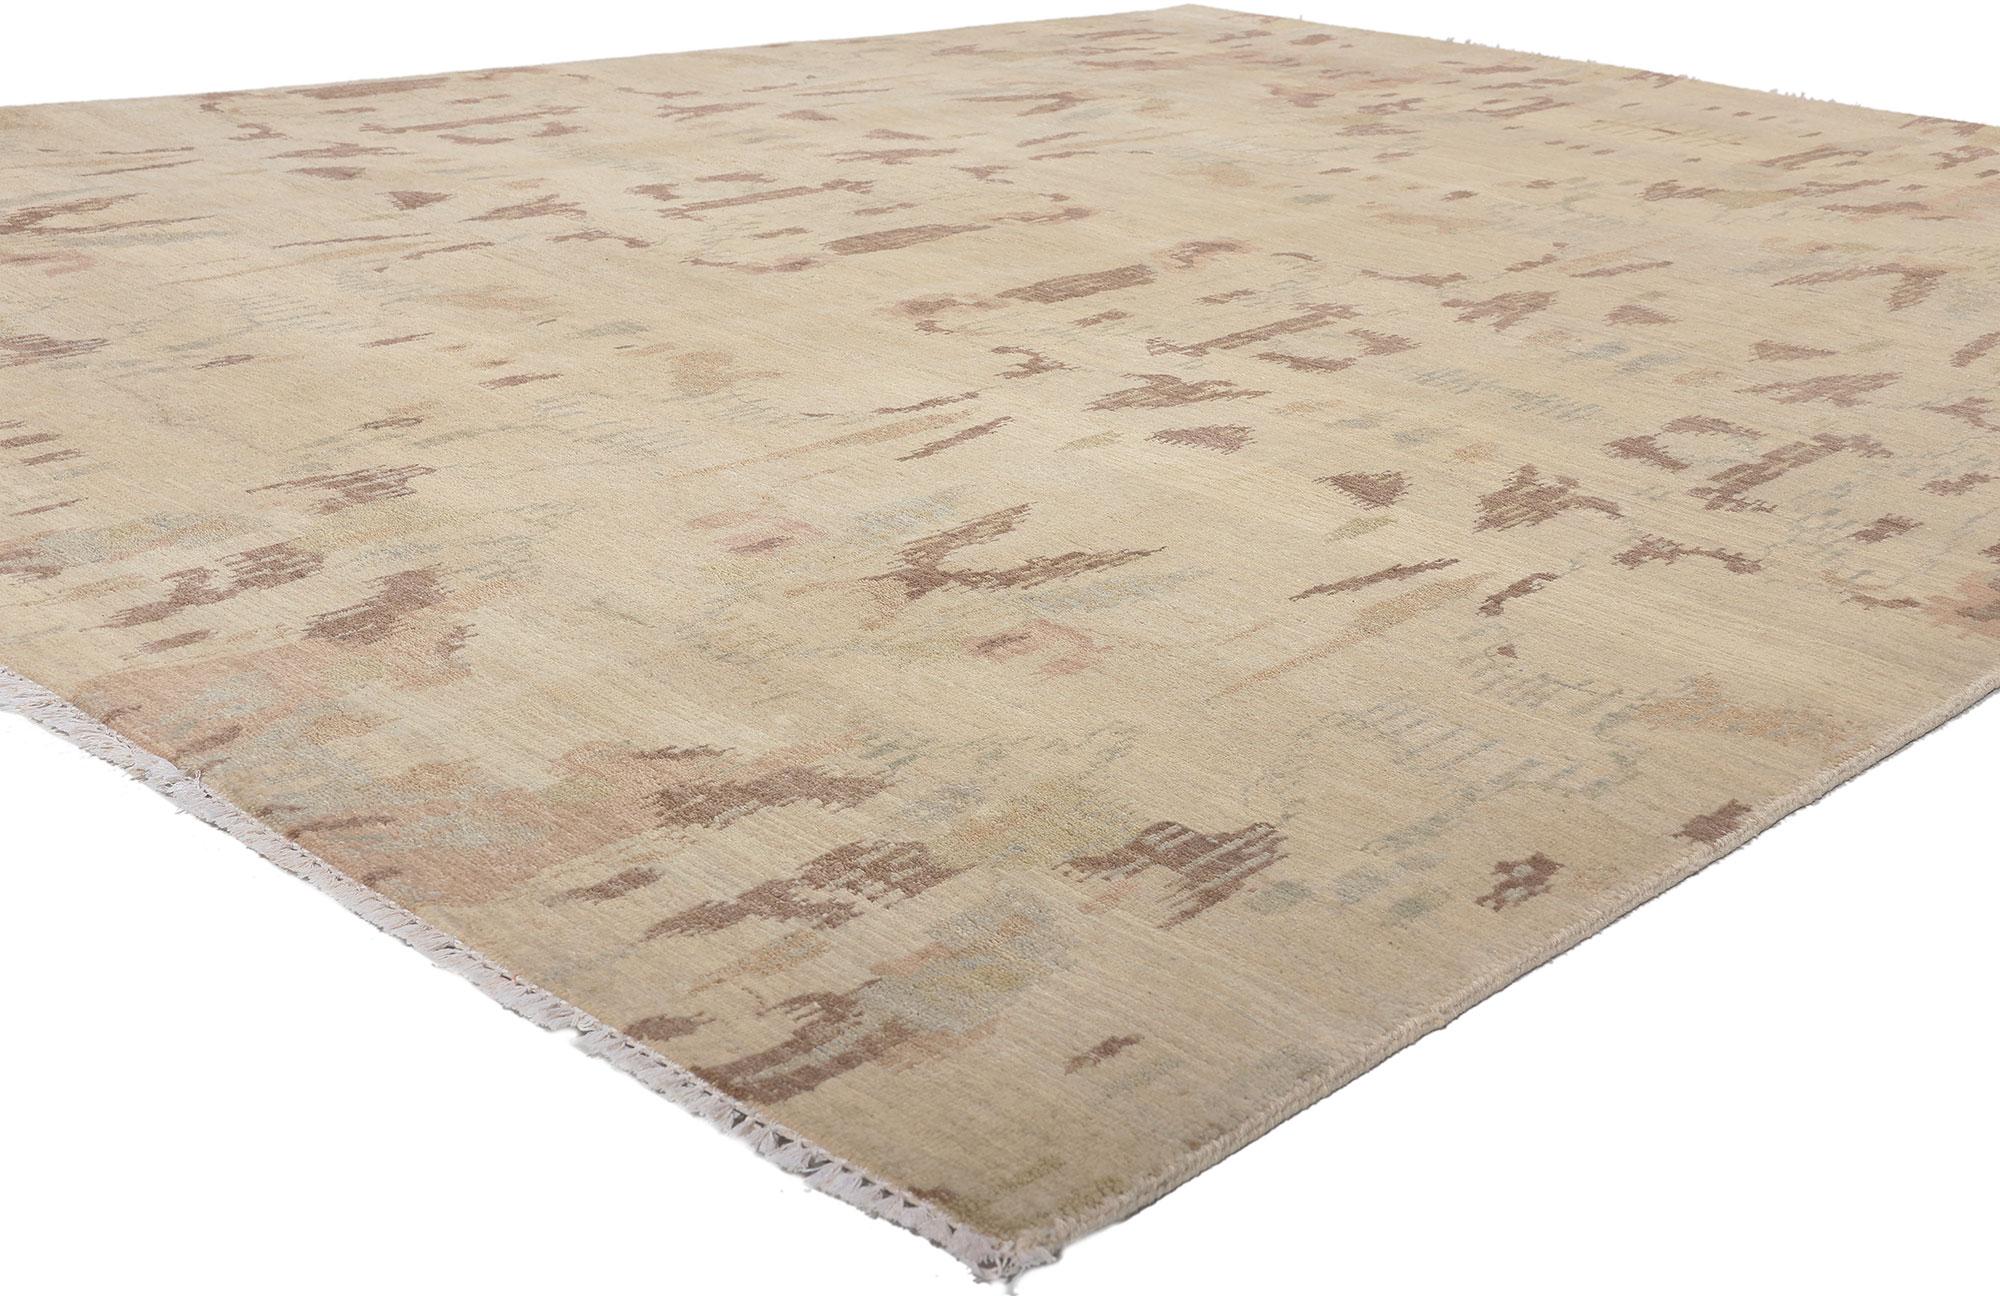 30296 Transitional Ikat Rug, 07'11 x 10'00.
Earth-tone elegance meets subtle sophistication in this hand knotted wool transitional area rug. The primitive ikat design and neutral earthy colors woven into this piece work together creating a soft and